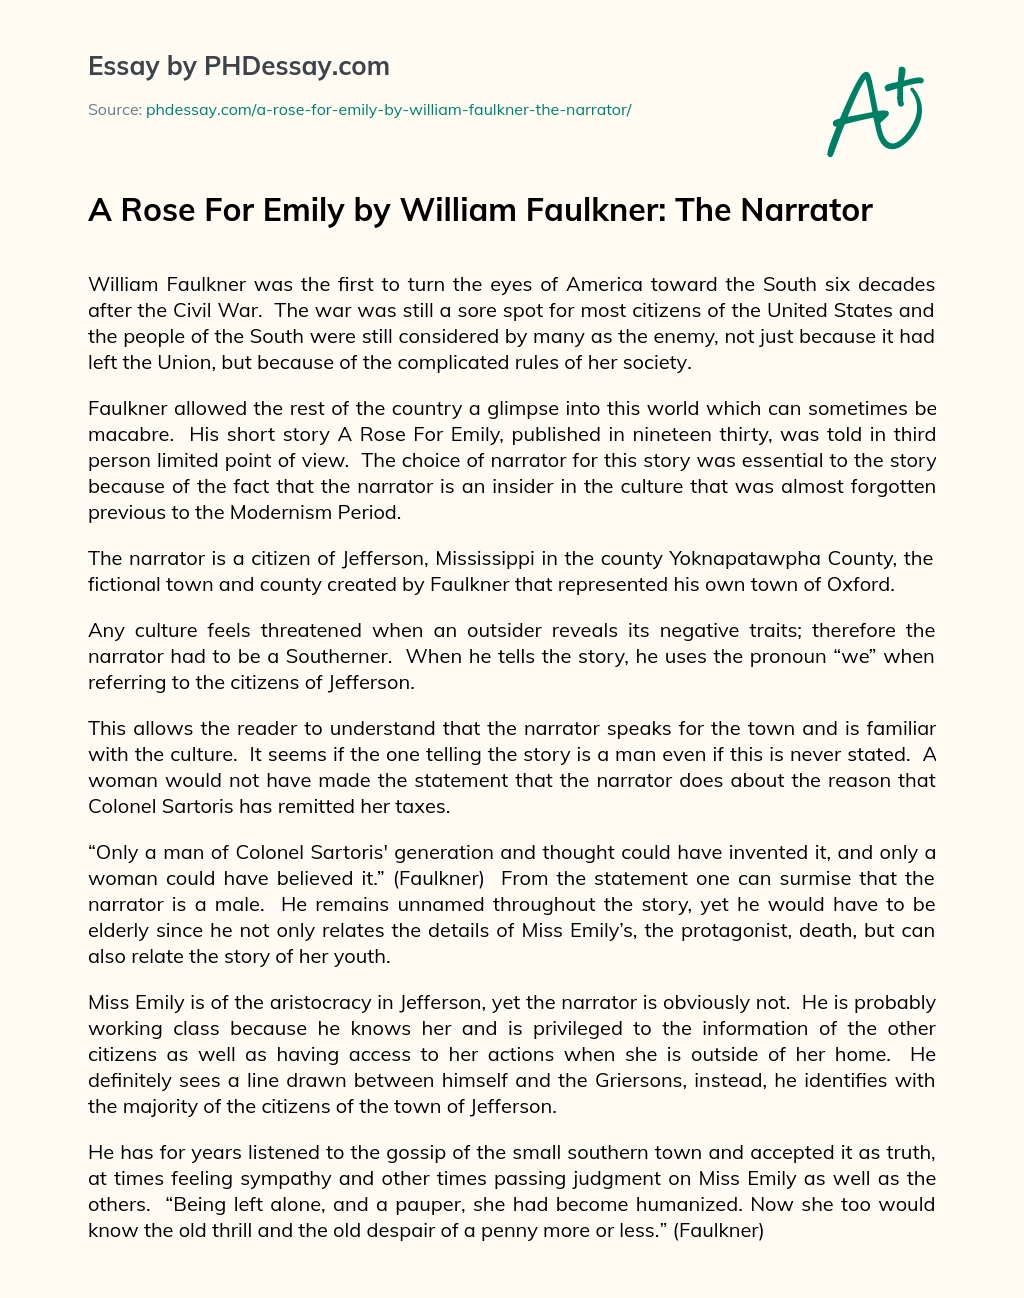 A Rose For Emily by William Faulkner: The Narrator essay